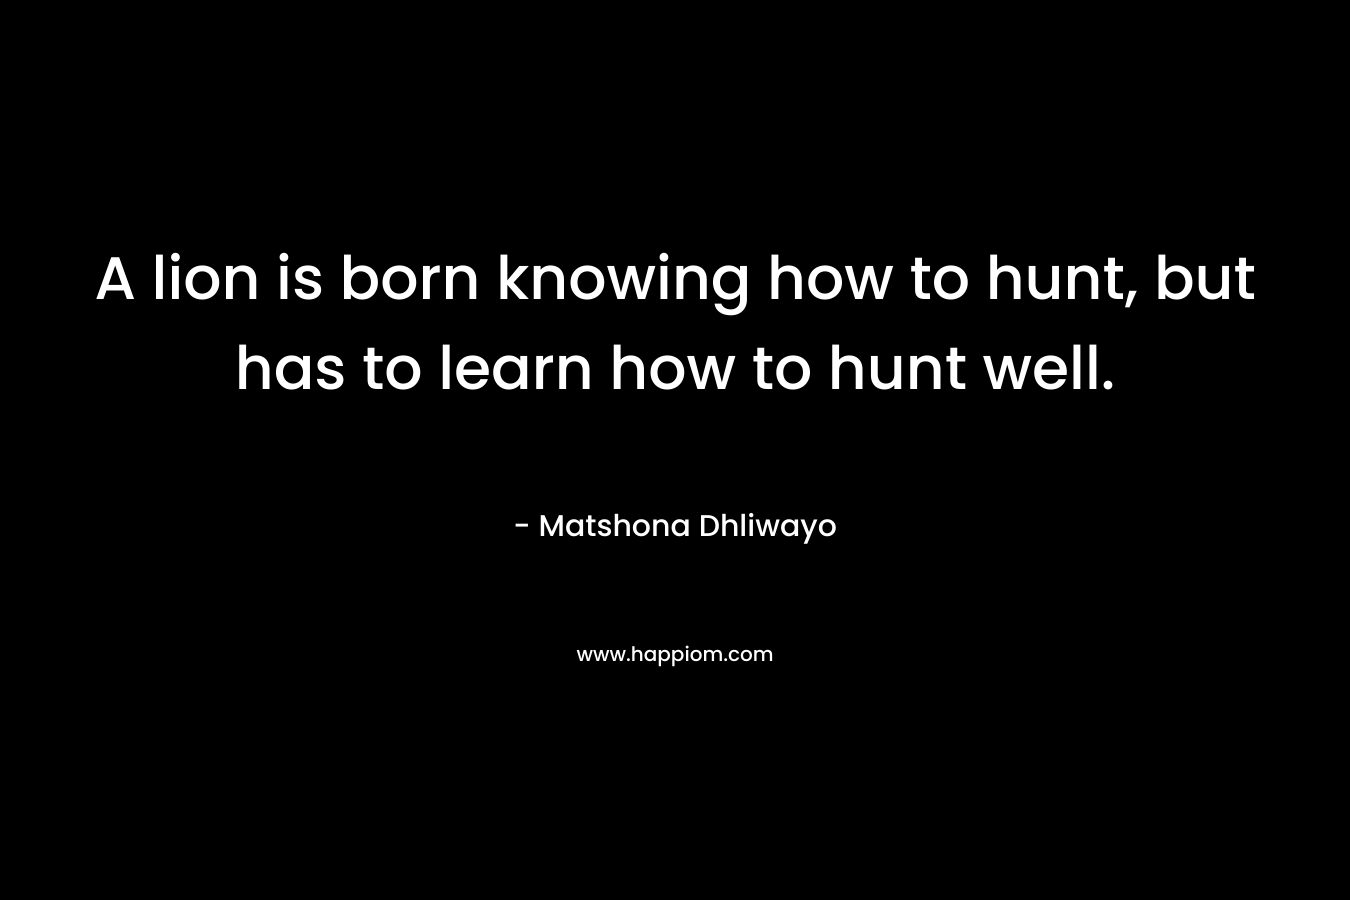 A lion is born knowing how to hunt, but has to learn how to hunt well.